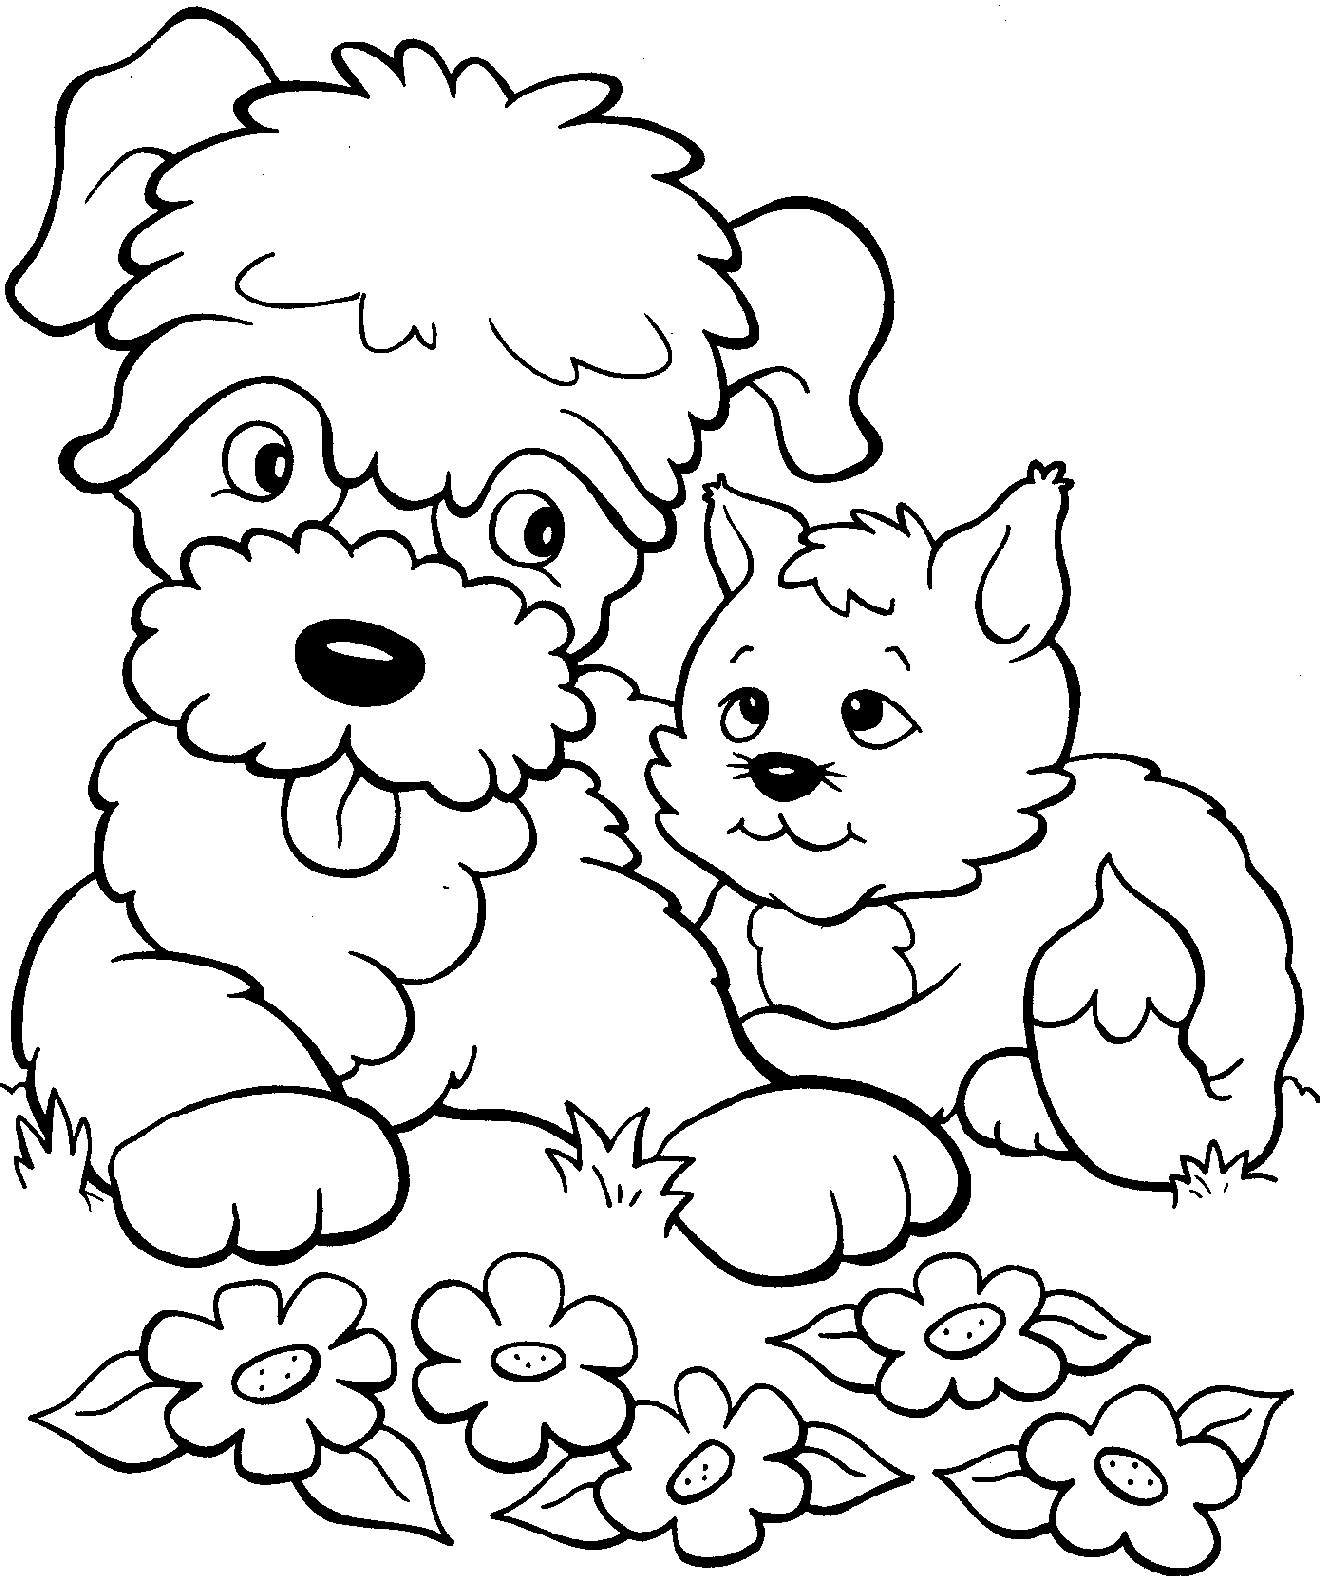 kitten color pages kitten coloring pages best coloring pages for kids pages color kitten 